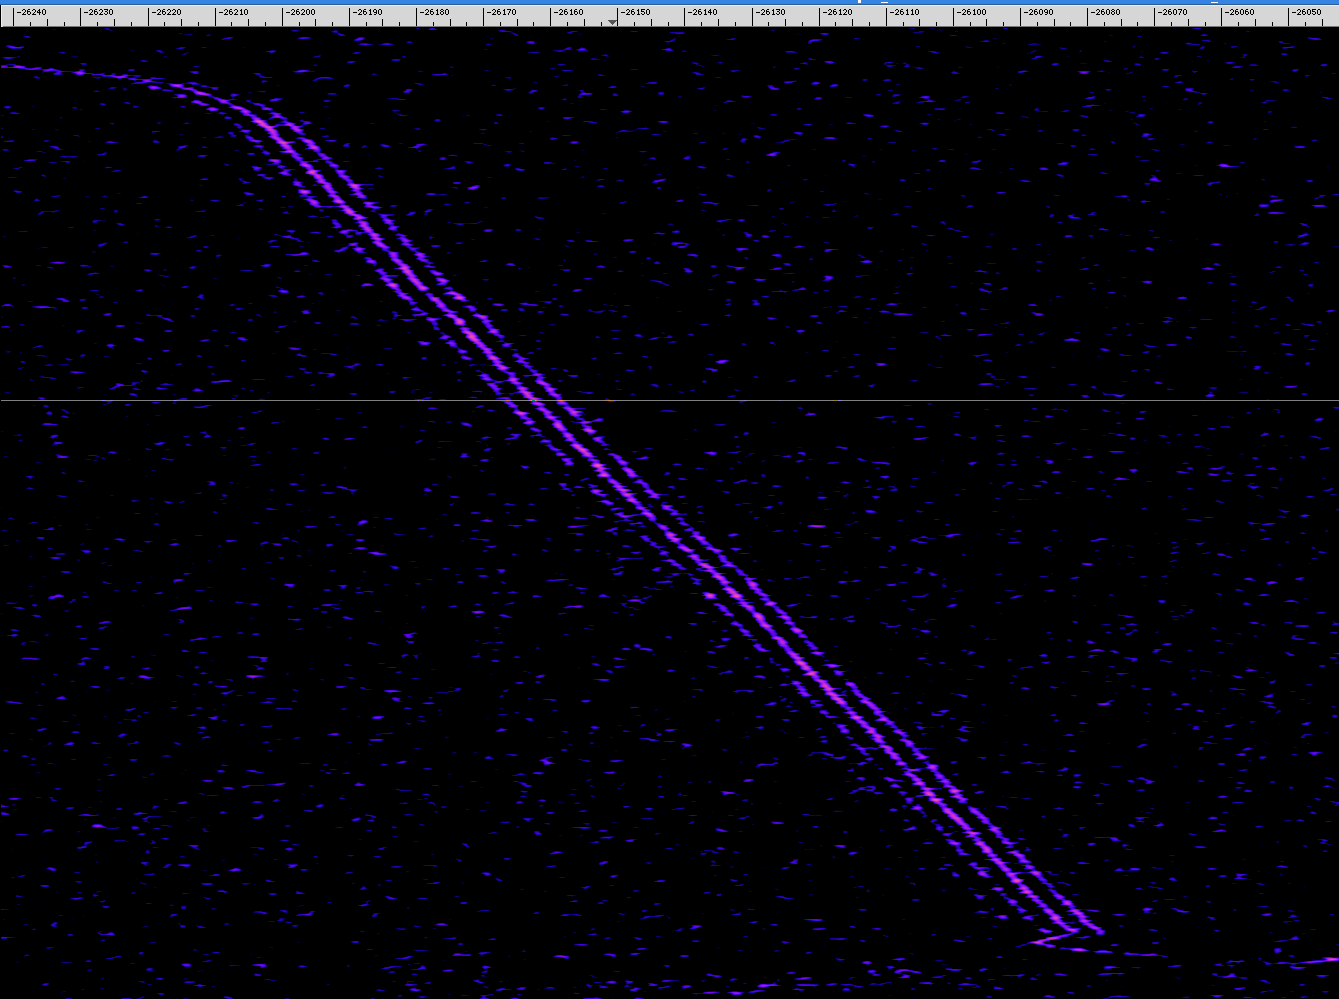 Fig03: 4.3 Hz sideband during section 'D-E'